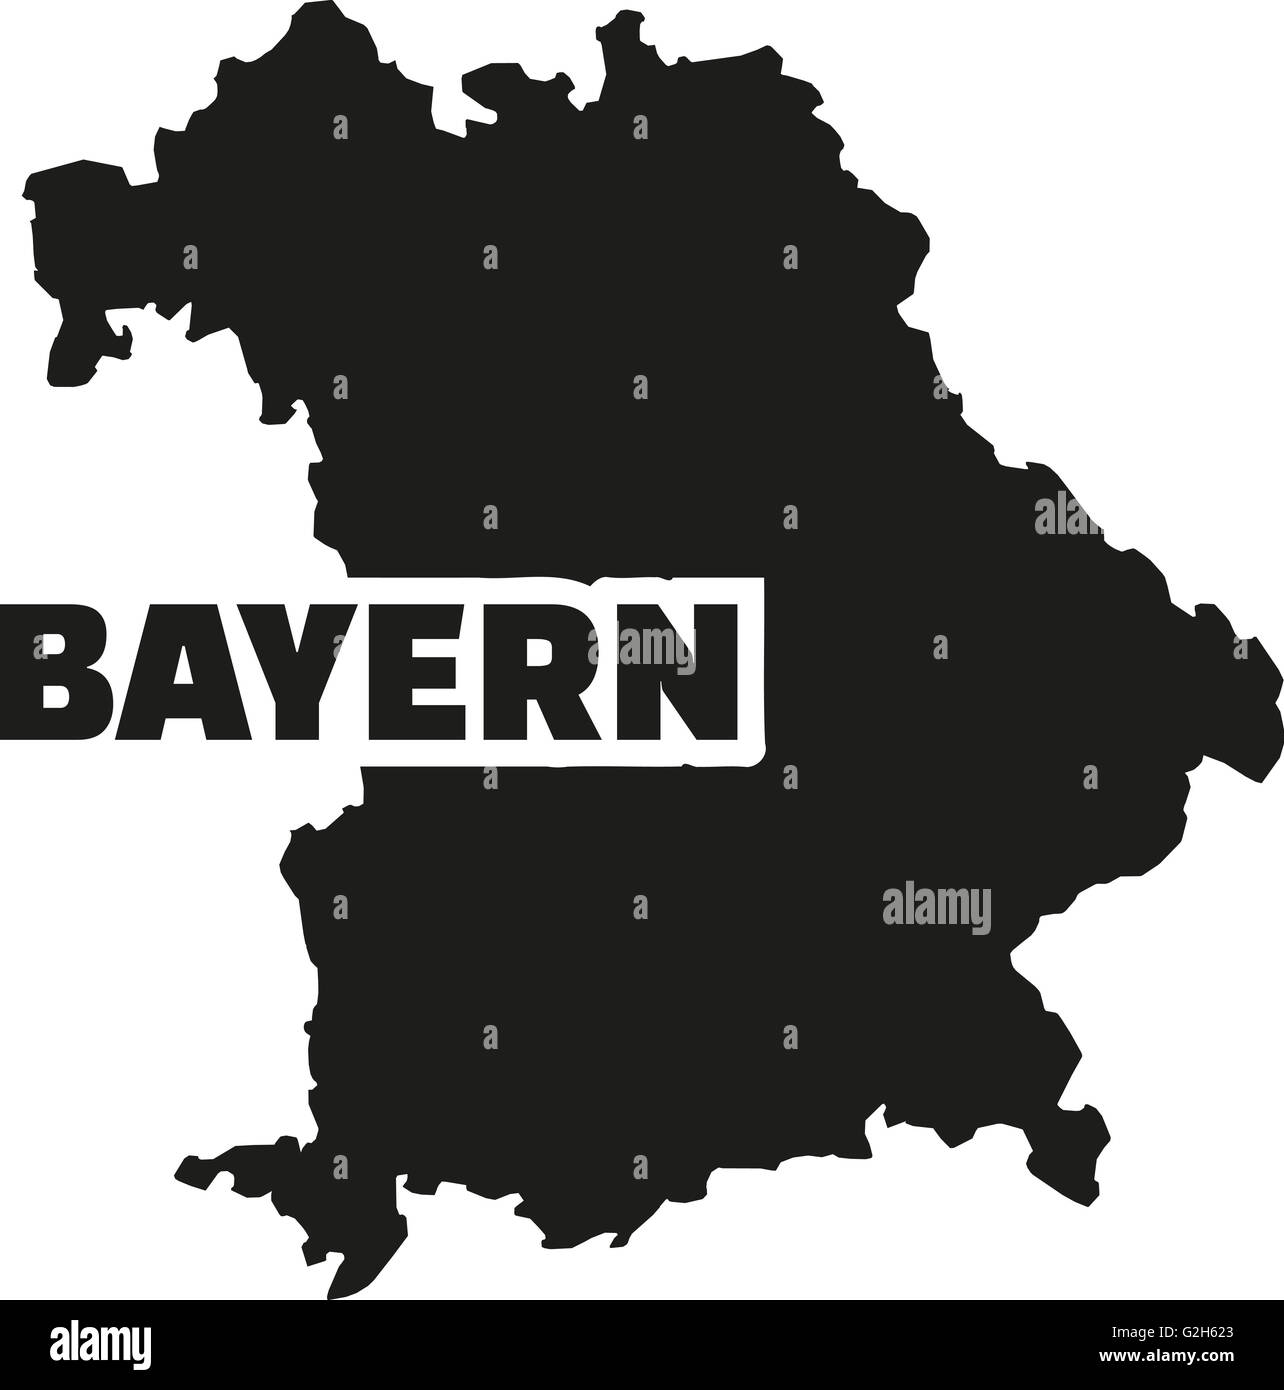 Bavaria map with german title Stock Photo